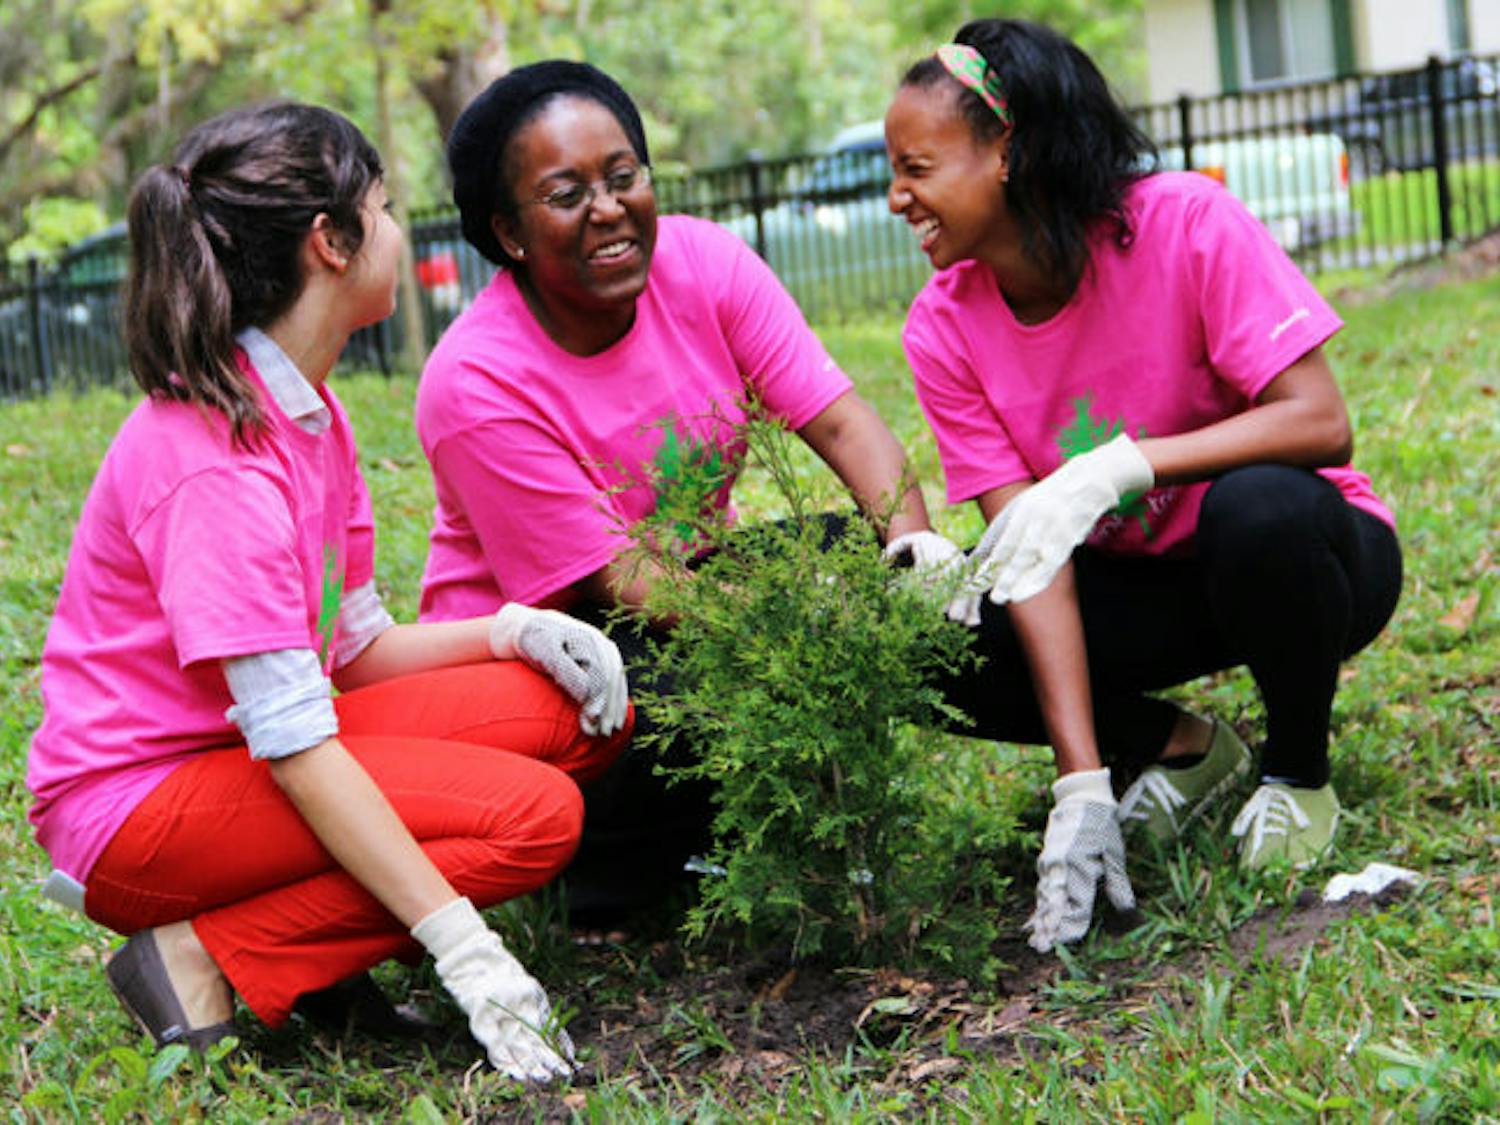 Taylor Cremo, 22, left, Shekinah Ellis, 21, center, and Monique Harris, 22, right, volunteer to plant trees near the President’s House as part of Tree Campus USA efforts.